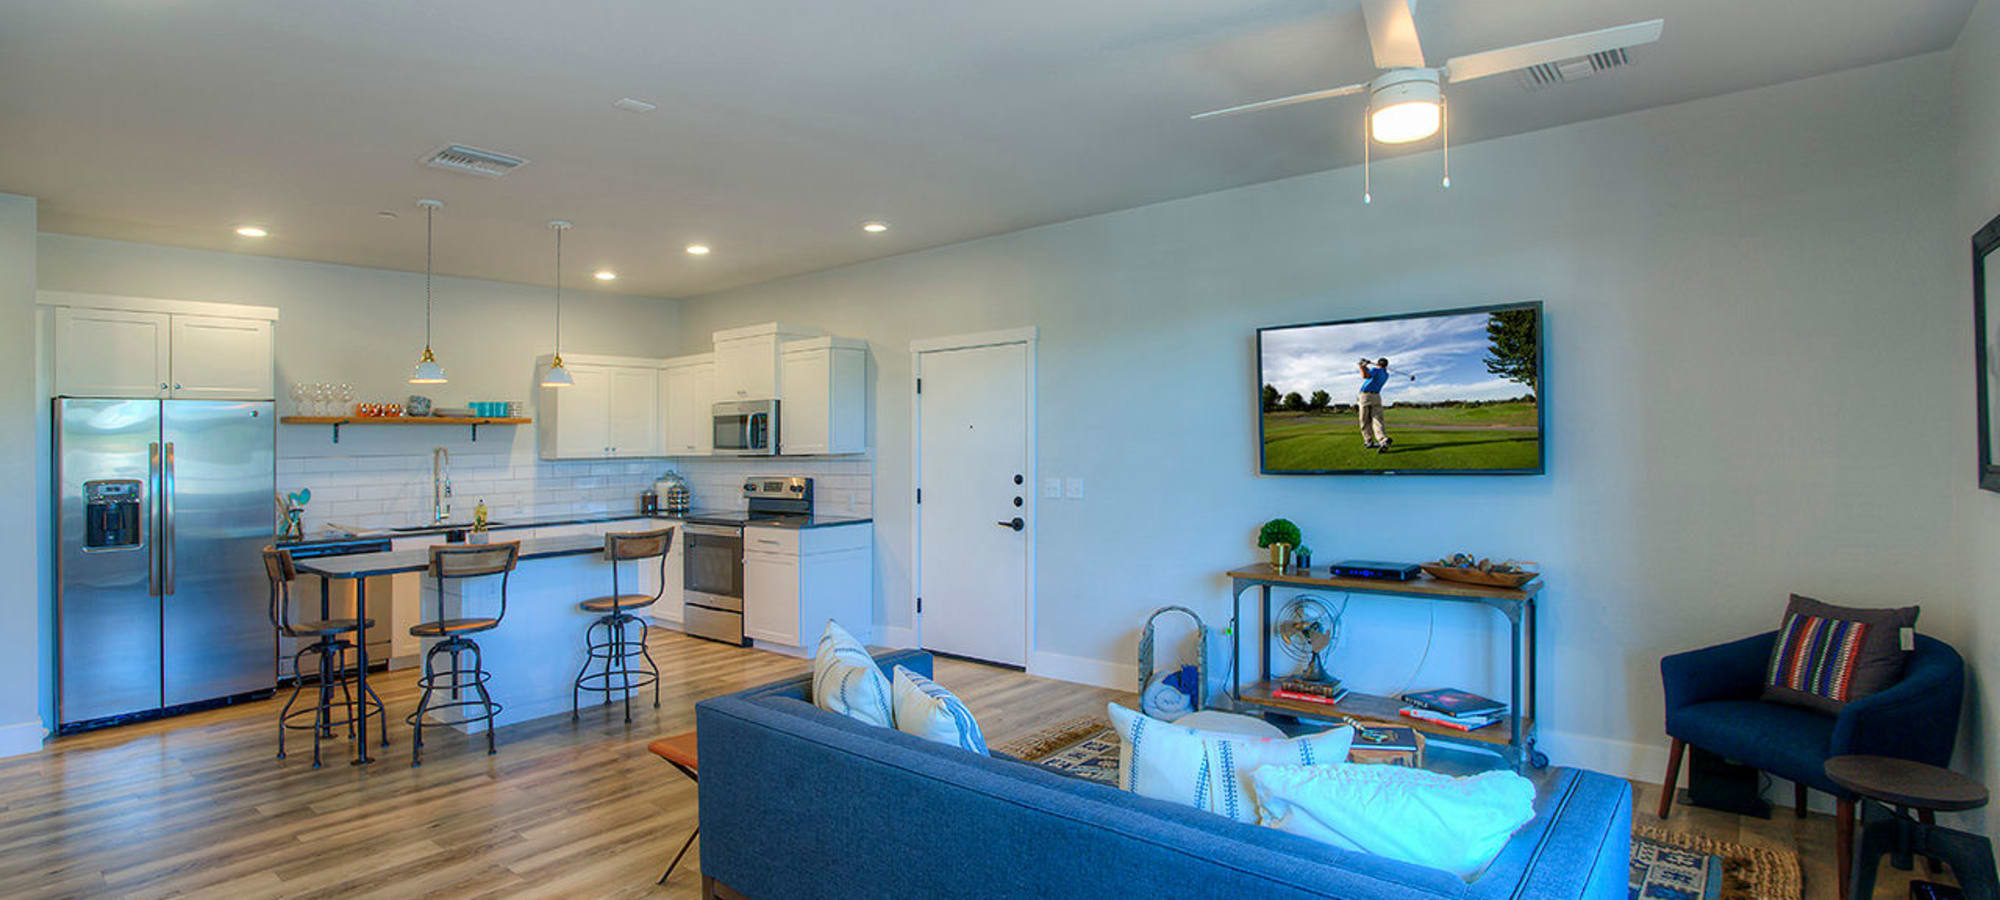 Ceiling fan and contemporary decor in open-concept living area of model home at District Lofts in Gilbert, Arizona